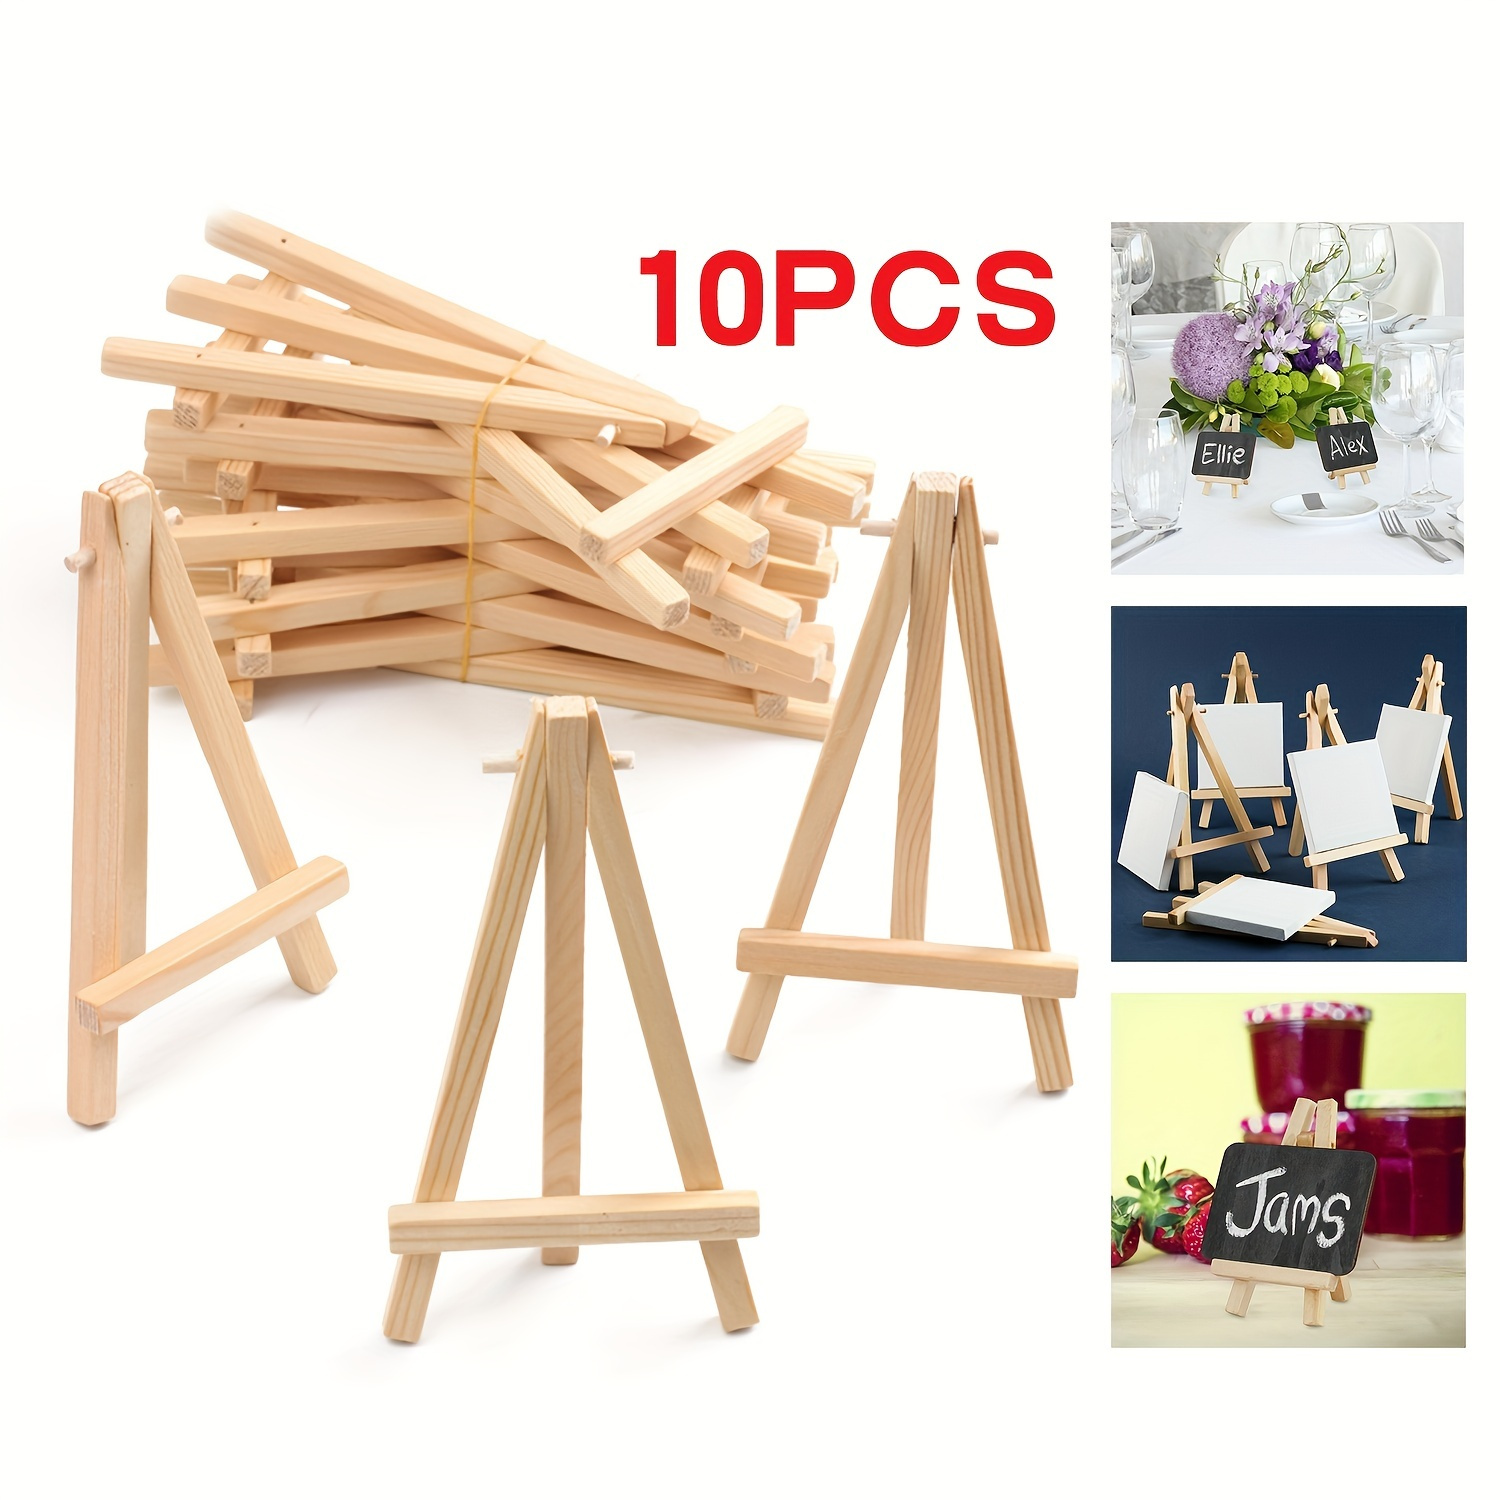 

10pcs Wooden Small Painting Stand 10pcs Mini Artist Wooden Easel Wood Wedding Table Card Stand Display Holder